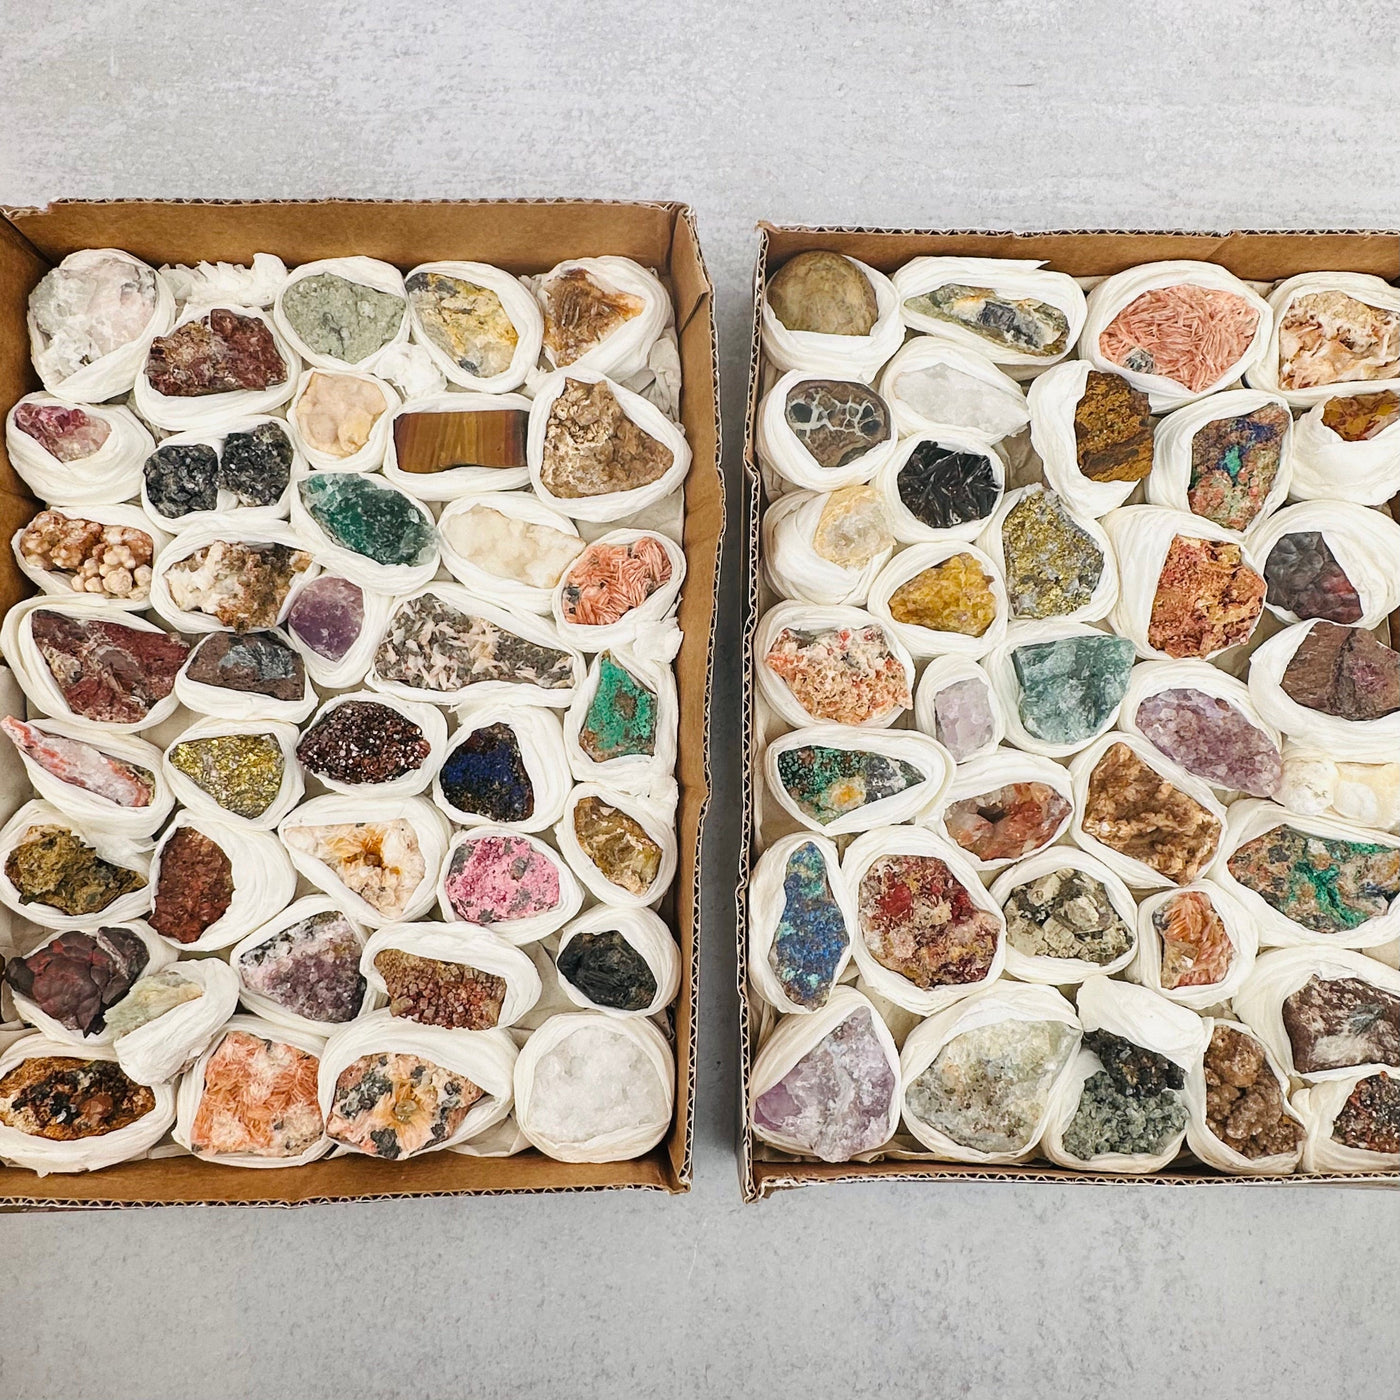 2 boxes of assorted minerals to show the variation.  Each box has a different variation of minerals.